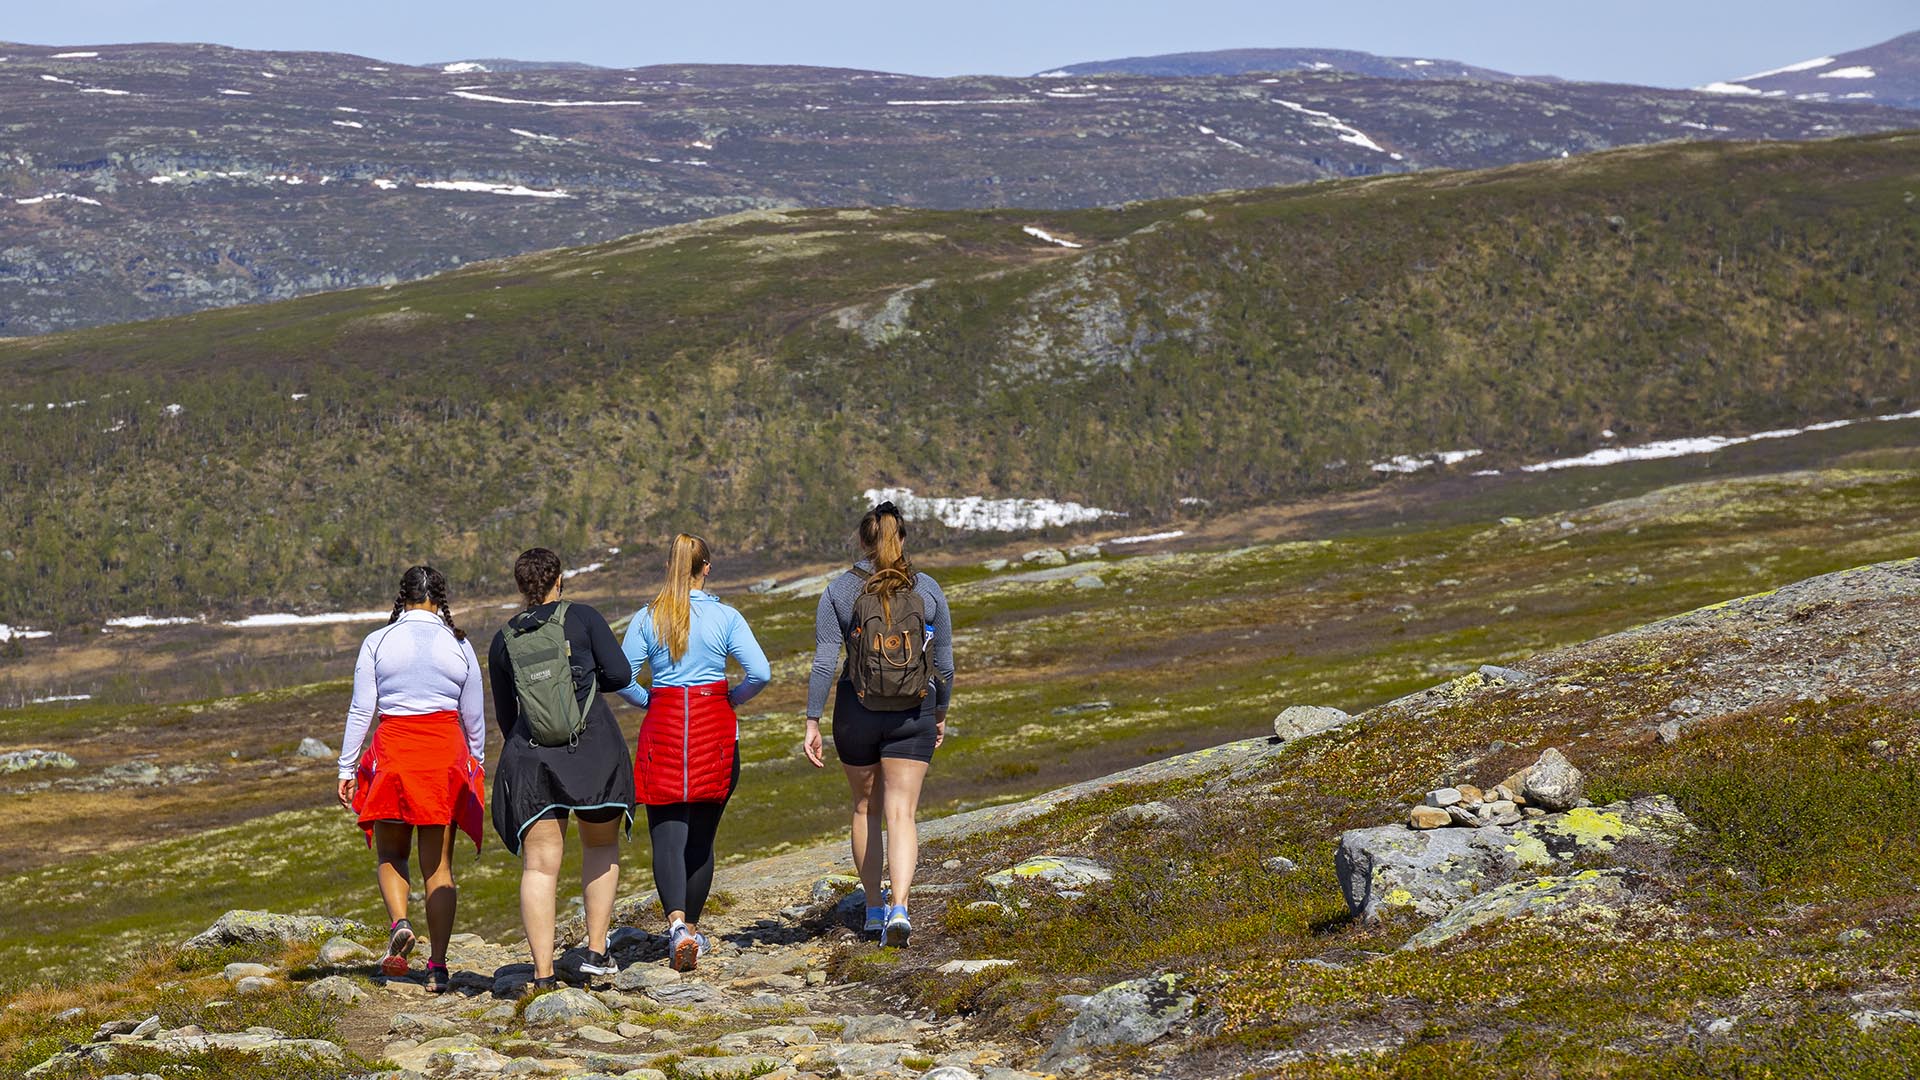 Four young girls hike on a broad trail in open mountain terrain on a warm summer day.